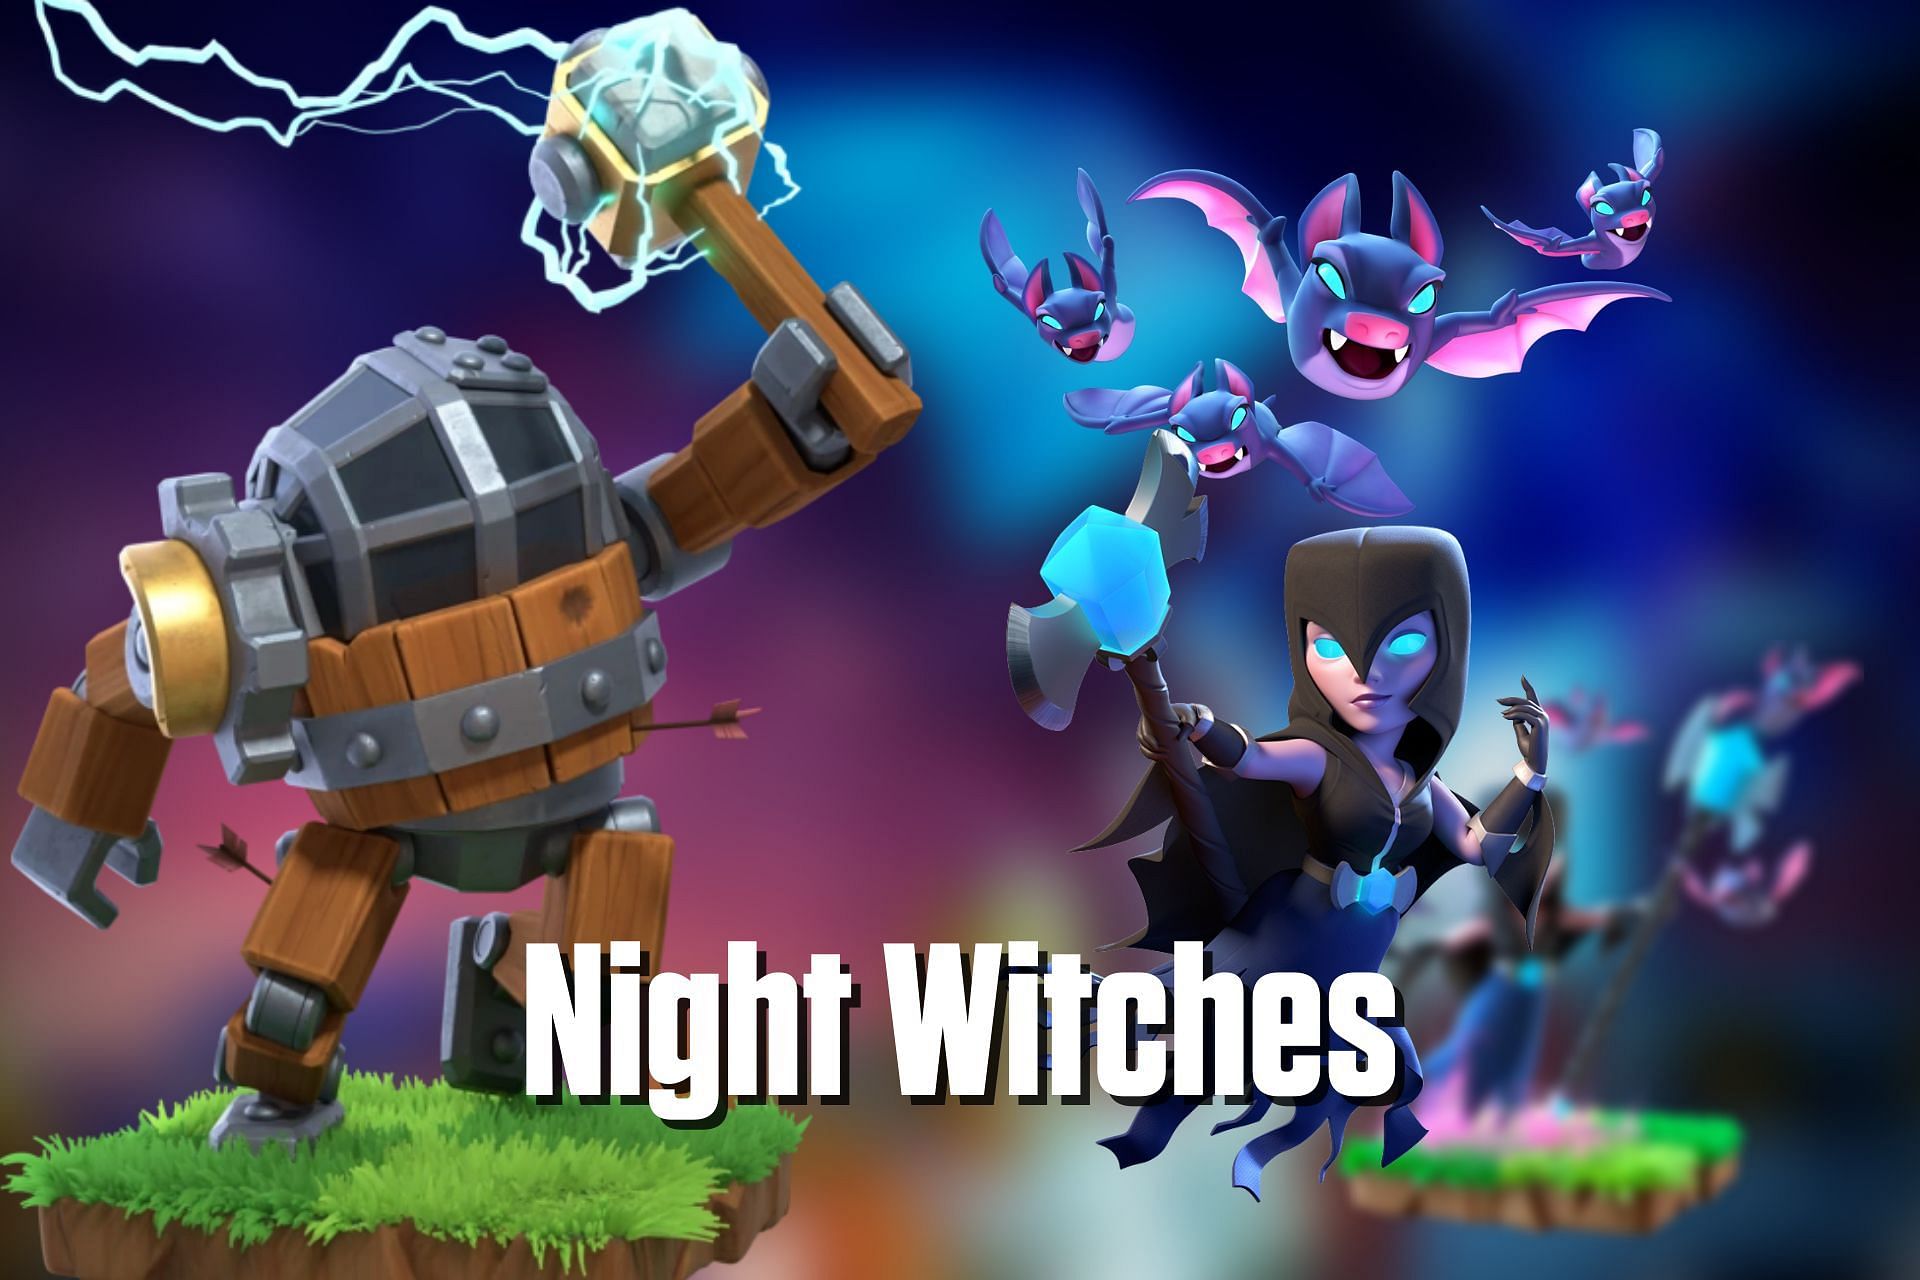 Night witches coc